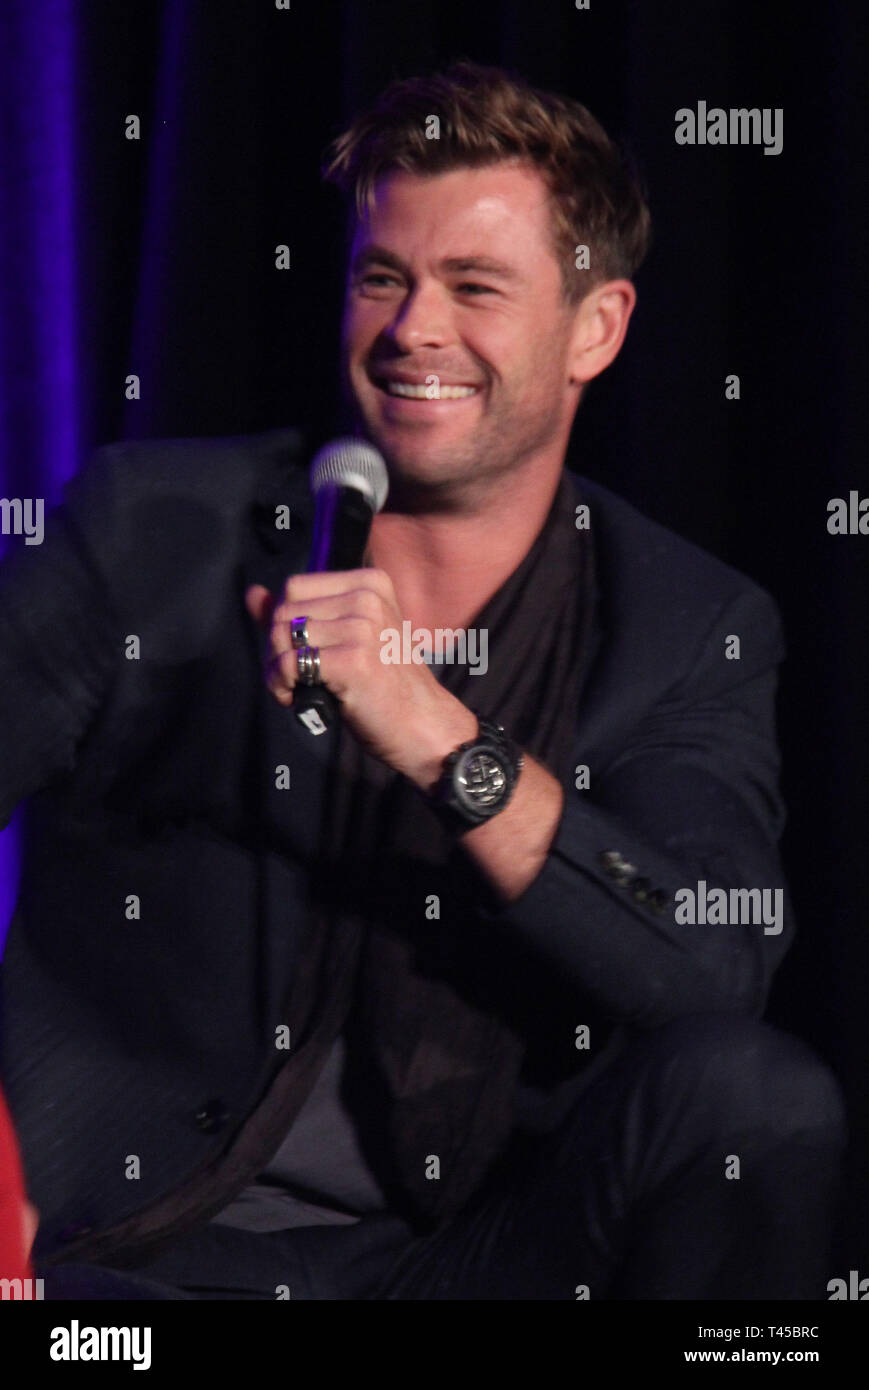 Chris Hemsworth  04/07/2019 'Avengers: Endgame' Press Conference held at The InterContinental Los Angeles Downtown in Los Angeles, CA  Photo: Cronos/Hollywood News Stock Photo